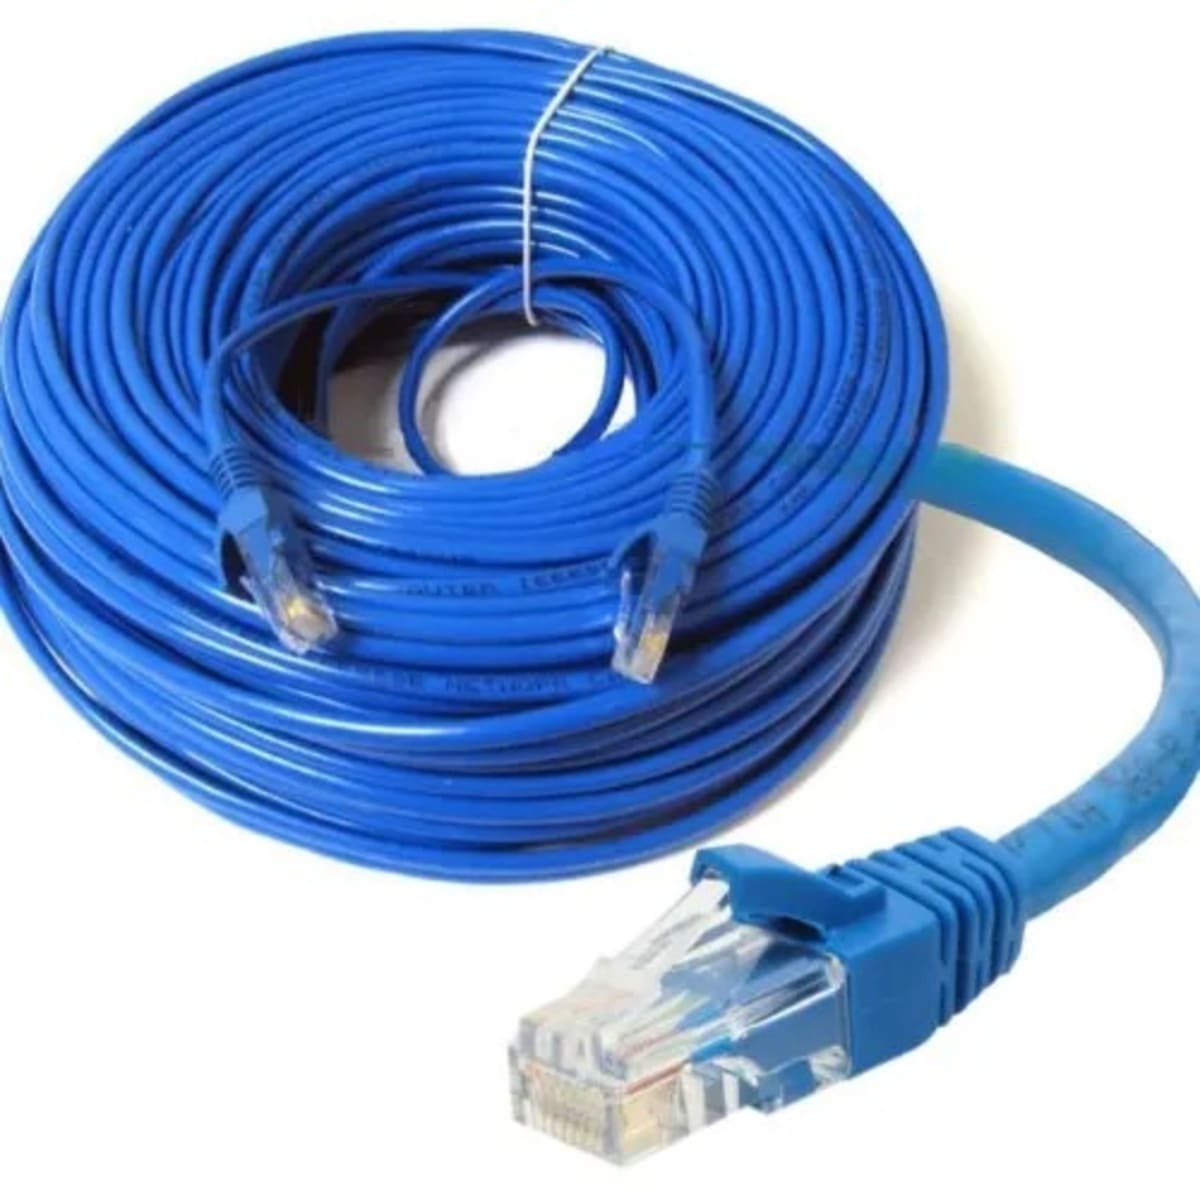 Cable UTP Cat5 Patch Cord 20m